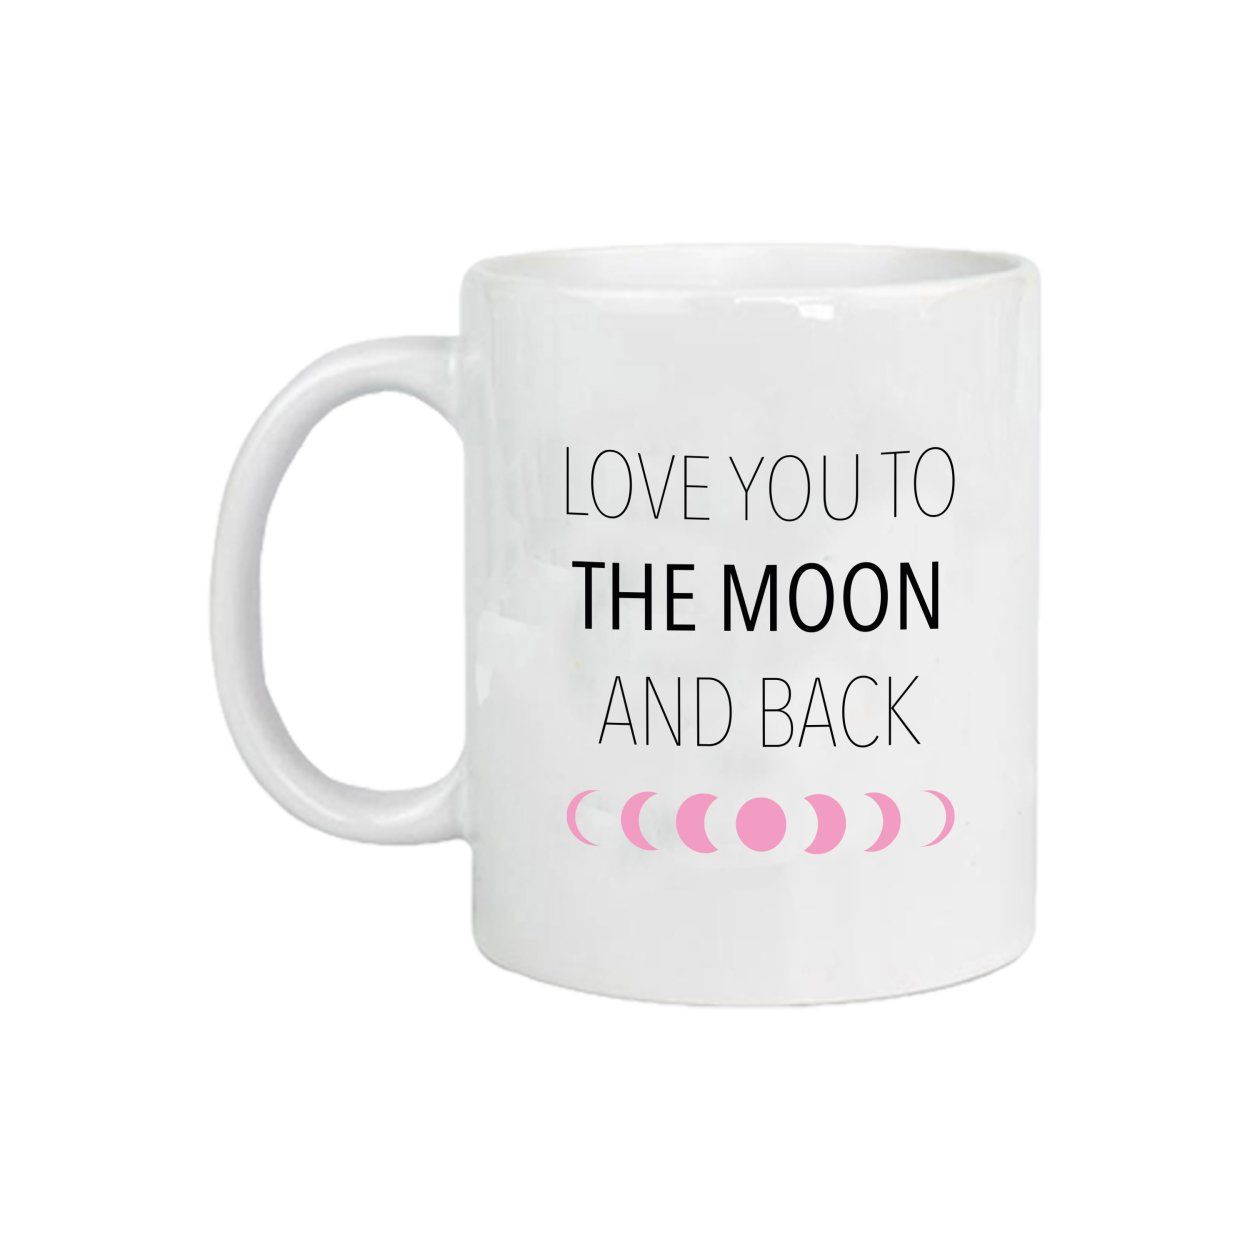 165878-love-you-to-the-moon-and-back-tasarim-kupa